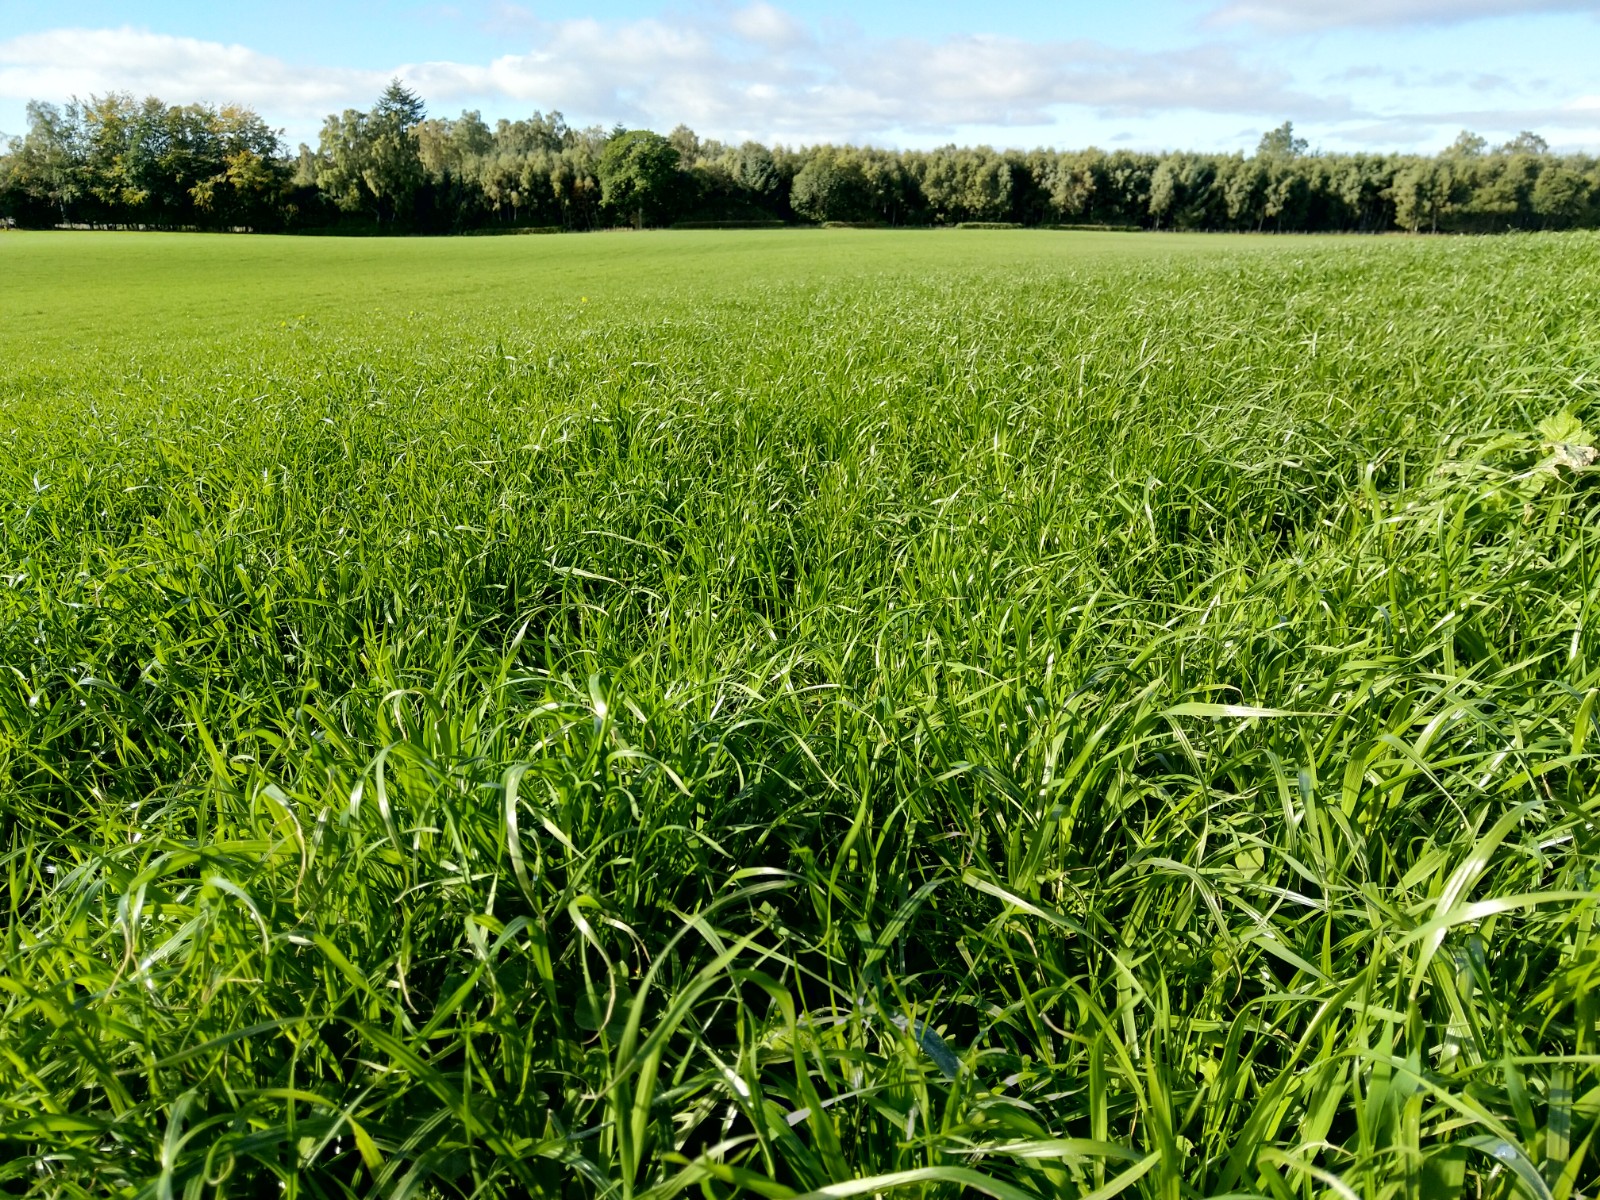 6 weeks after application -  sward, height & density shows consistency in biofertiliser quality